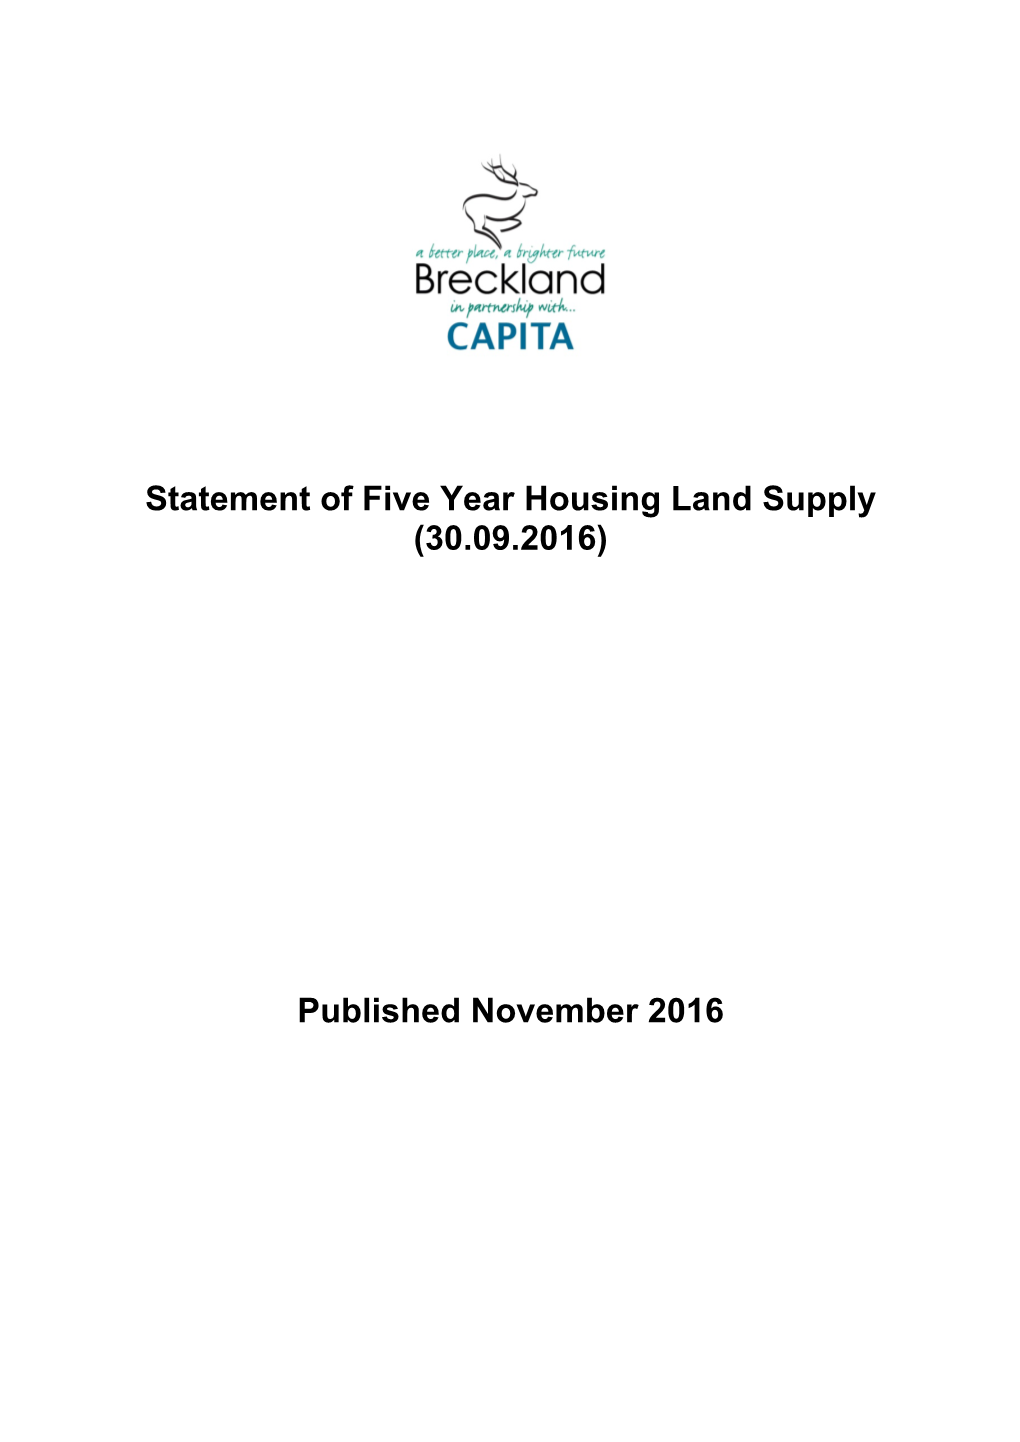 Statement of Five Year Housing Land Supply (30.09.2016) Published November 2016